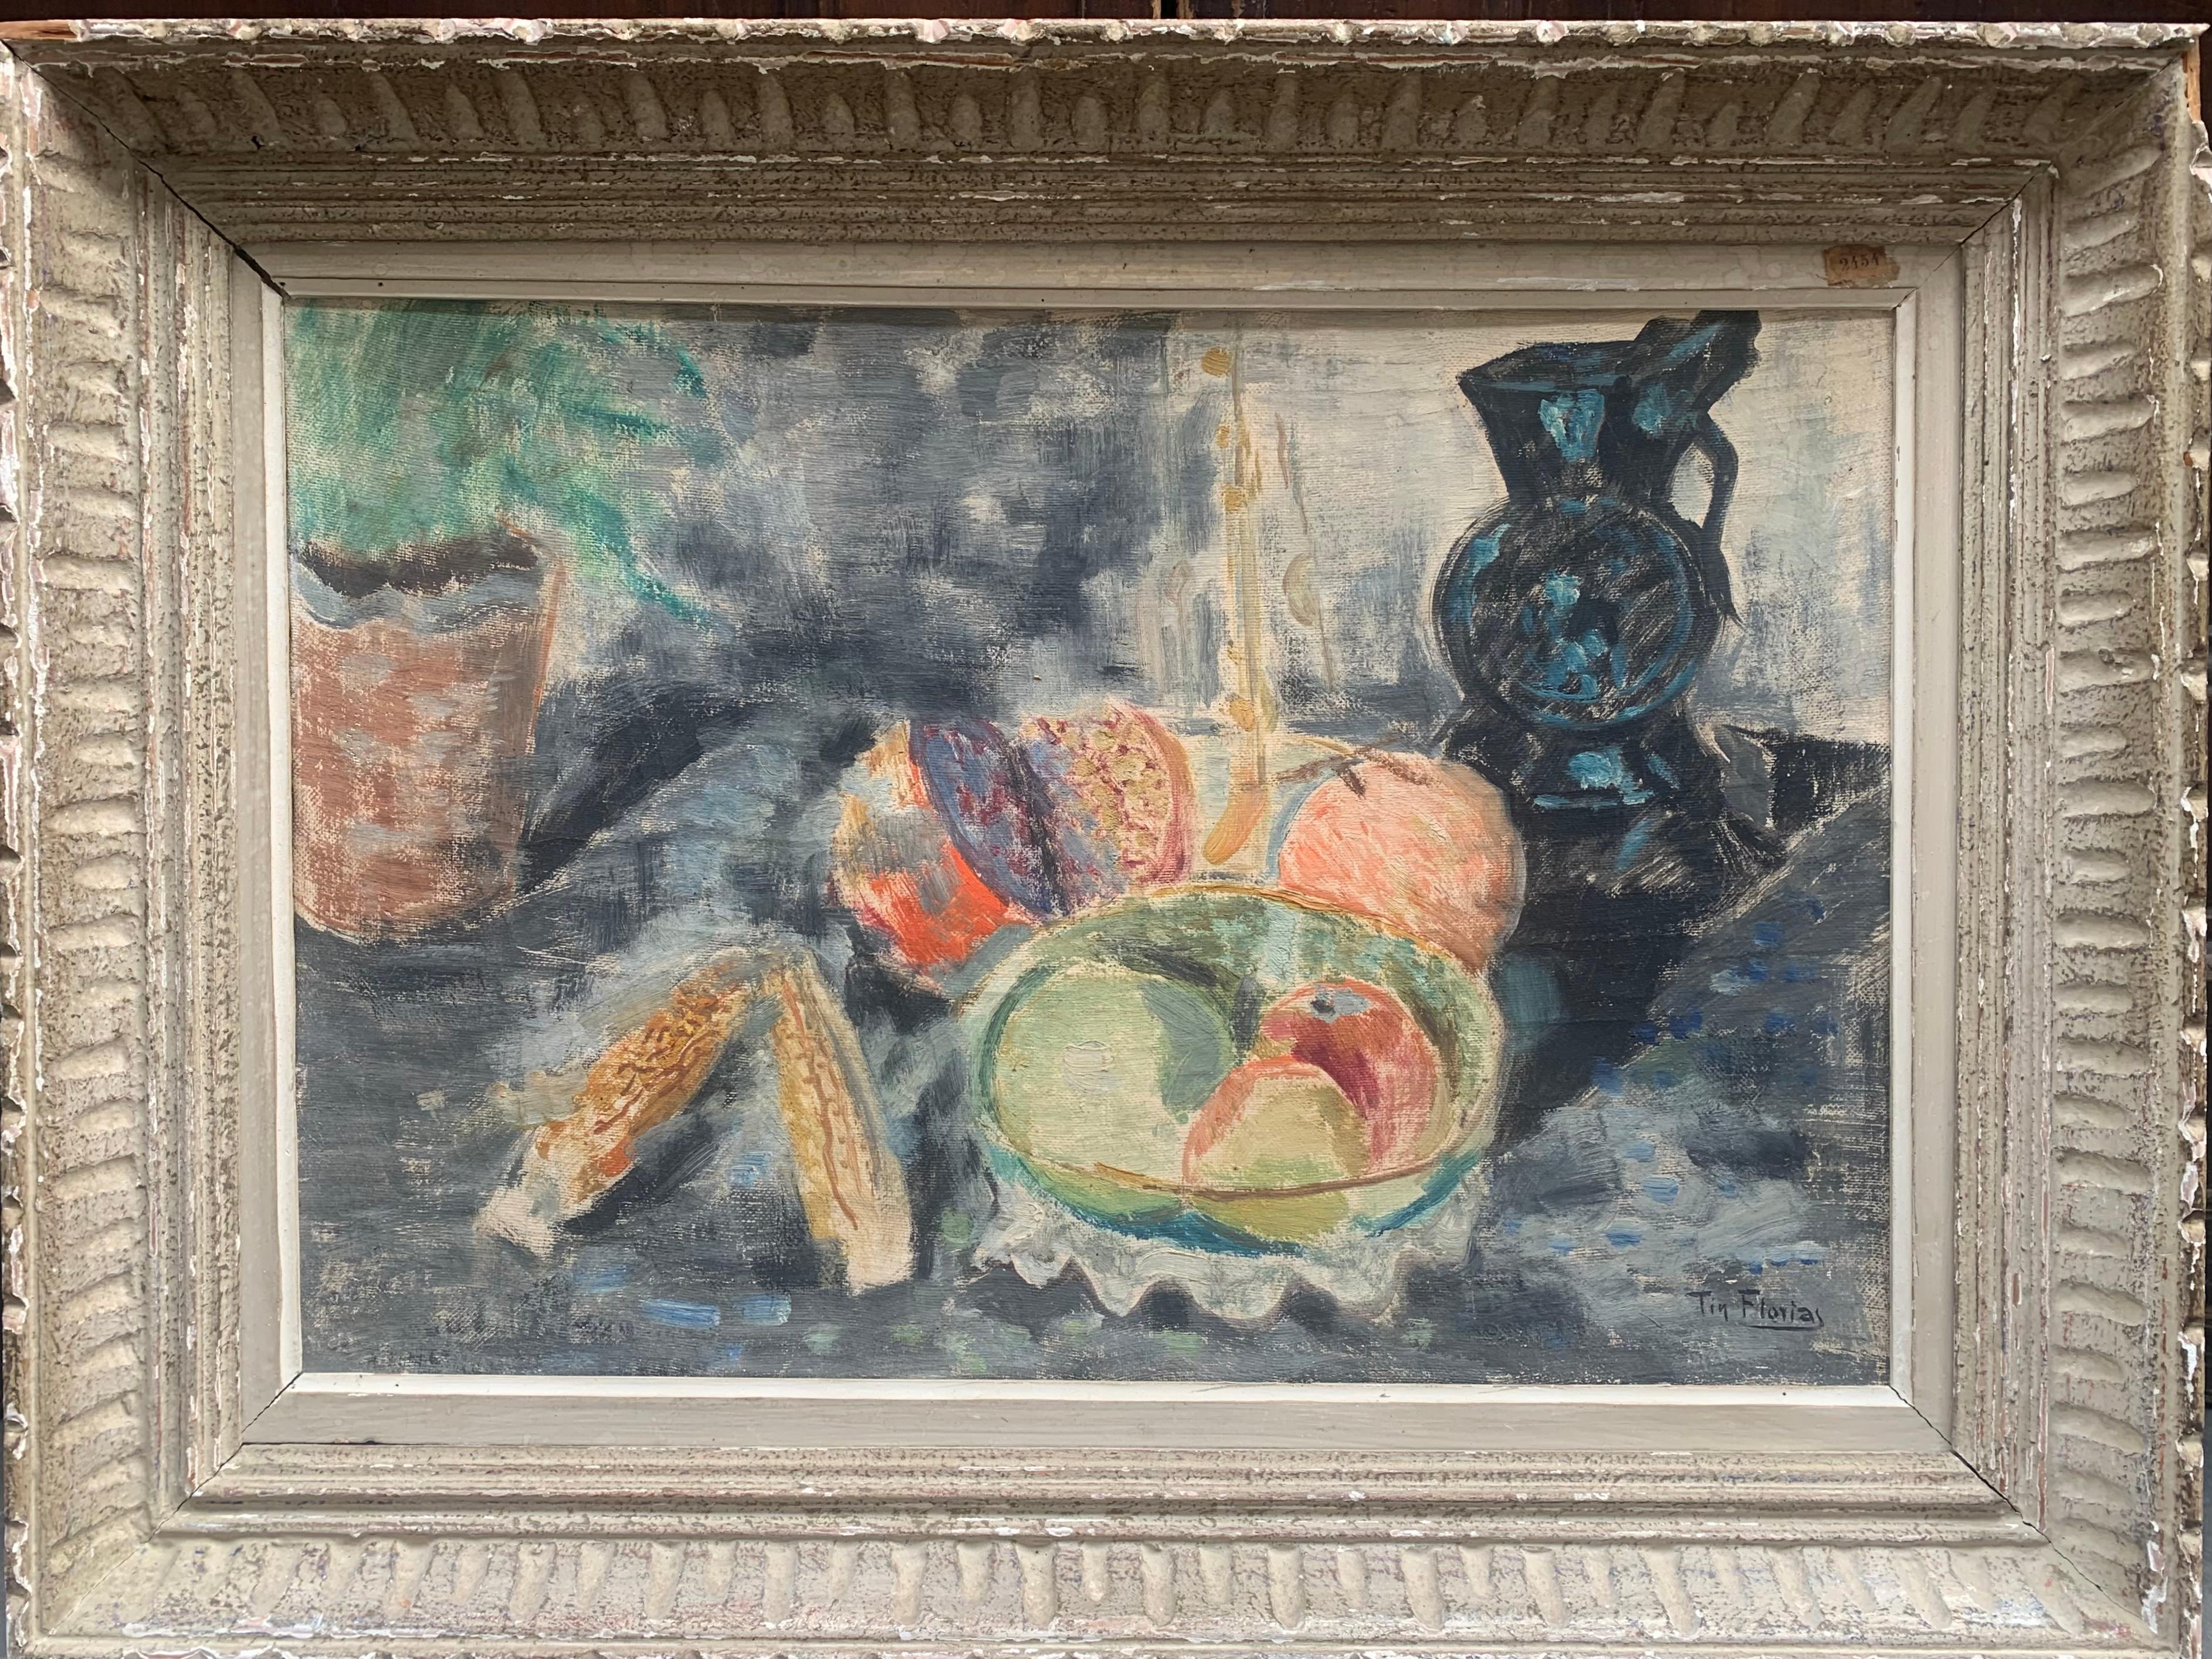 Constantin (Tin) Florias Still-Life Painting - Post Impressionist Still-Life. Circa 1920. With labels from Paris exhibitions.